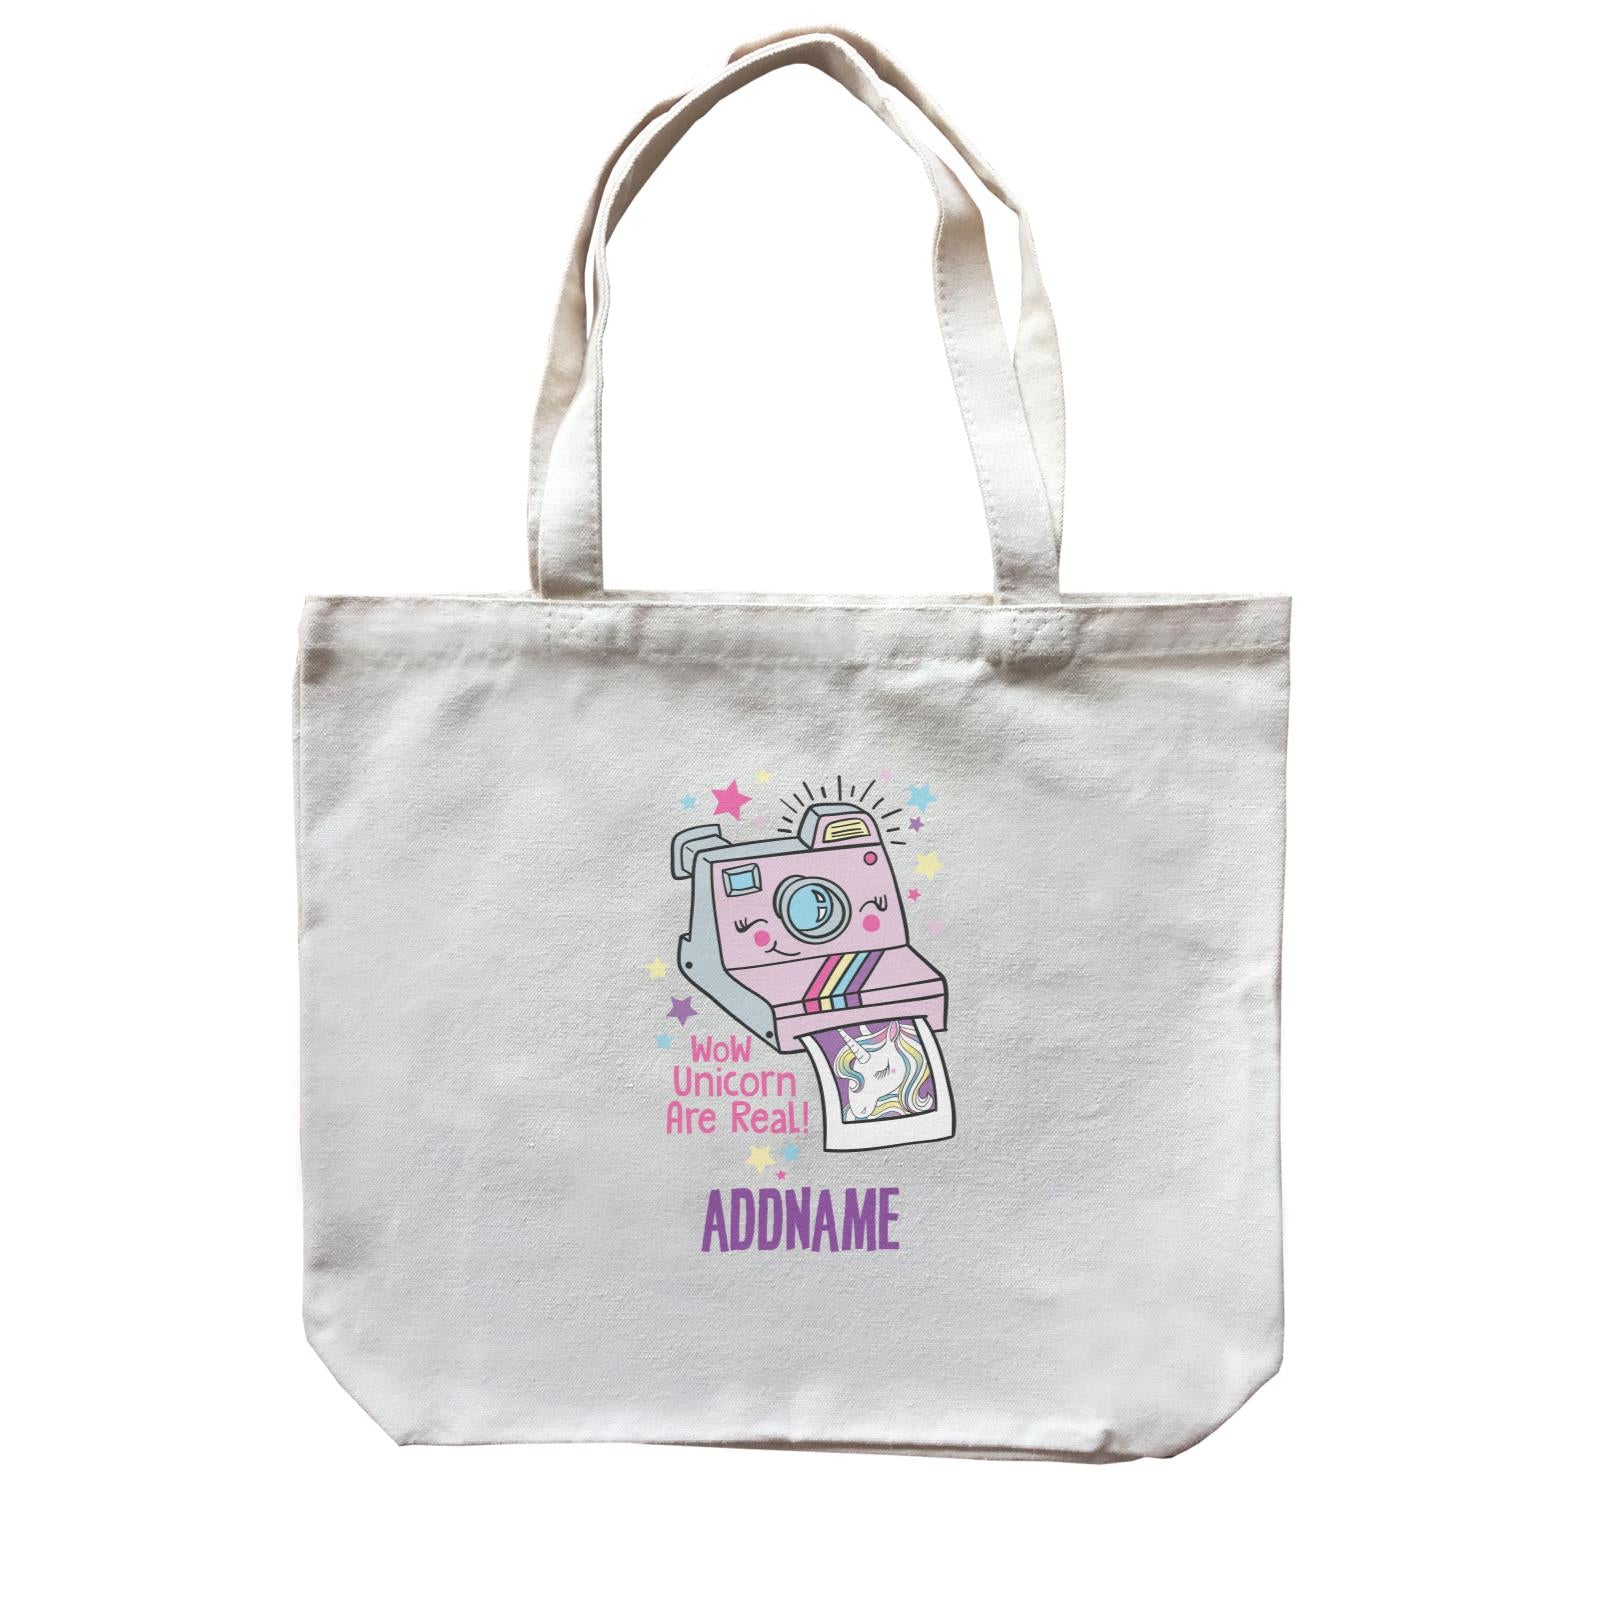 Cool Vibrant Series Wow Unicorn Are Real Photo Addname Canvas Bag